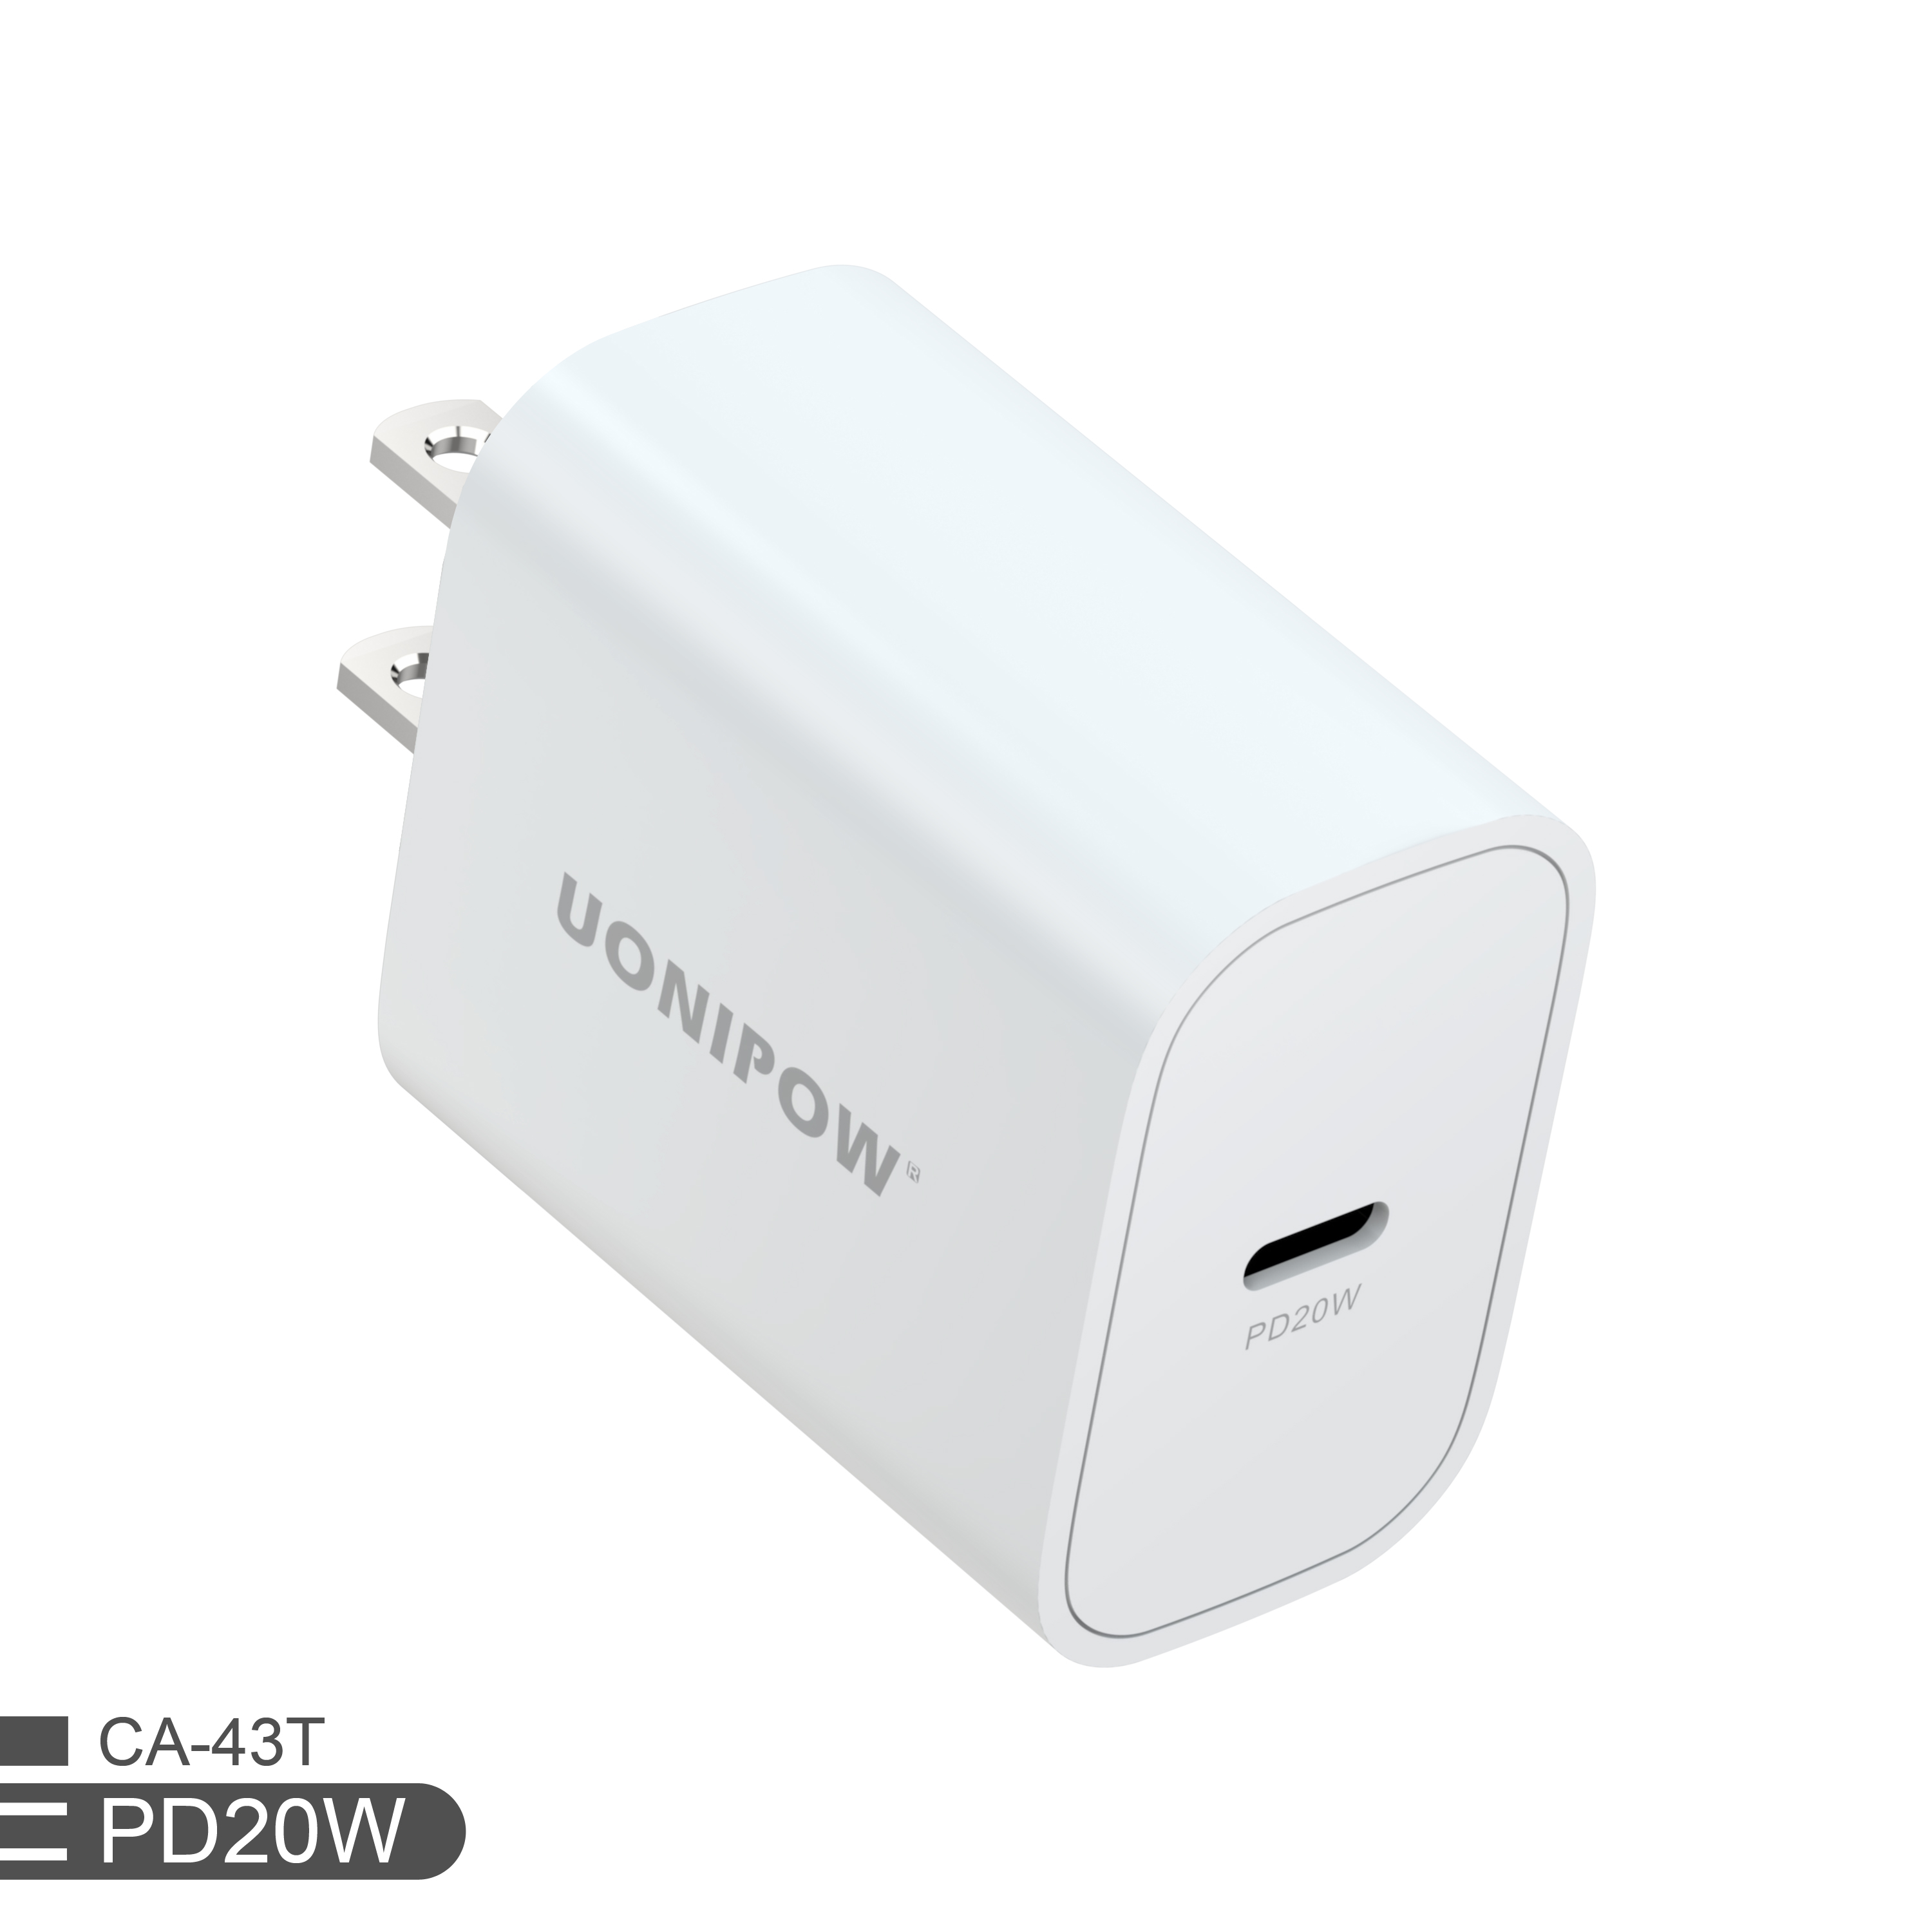 New fast charge 20W PD mobile phone charger